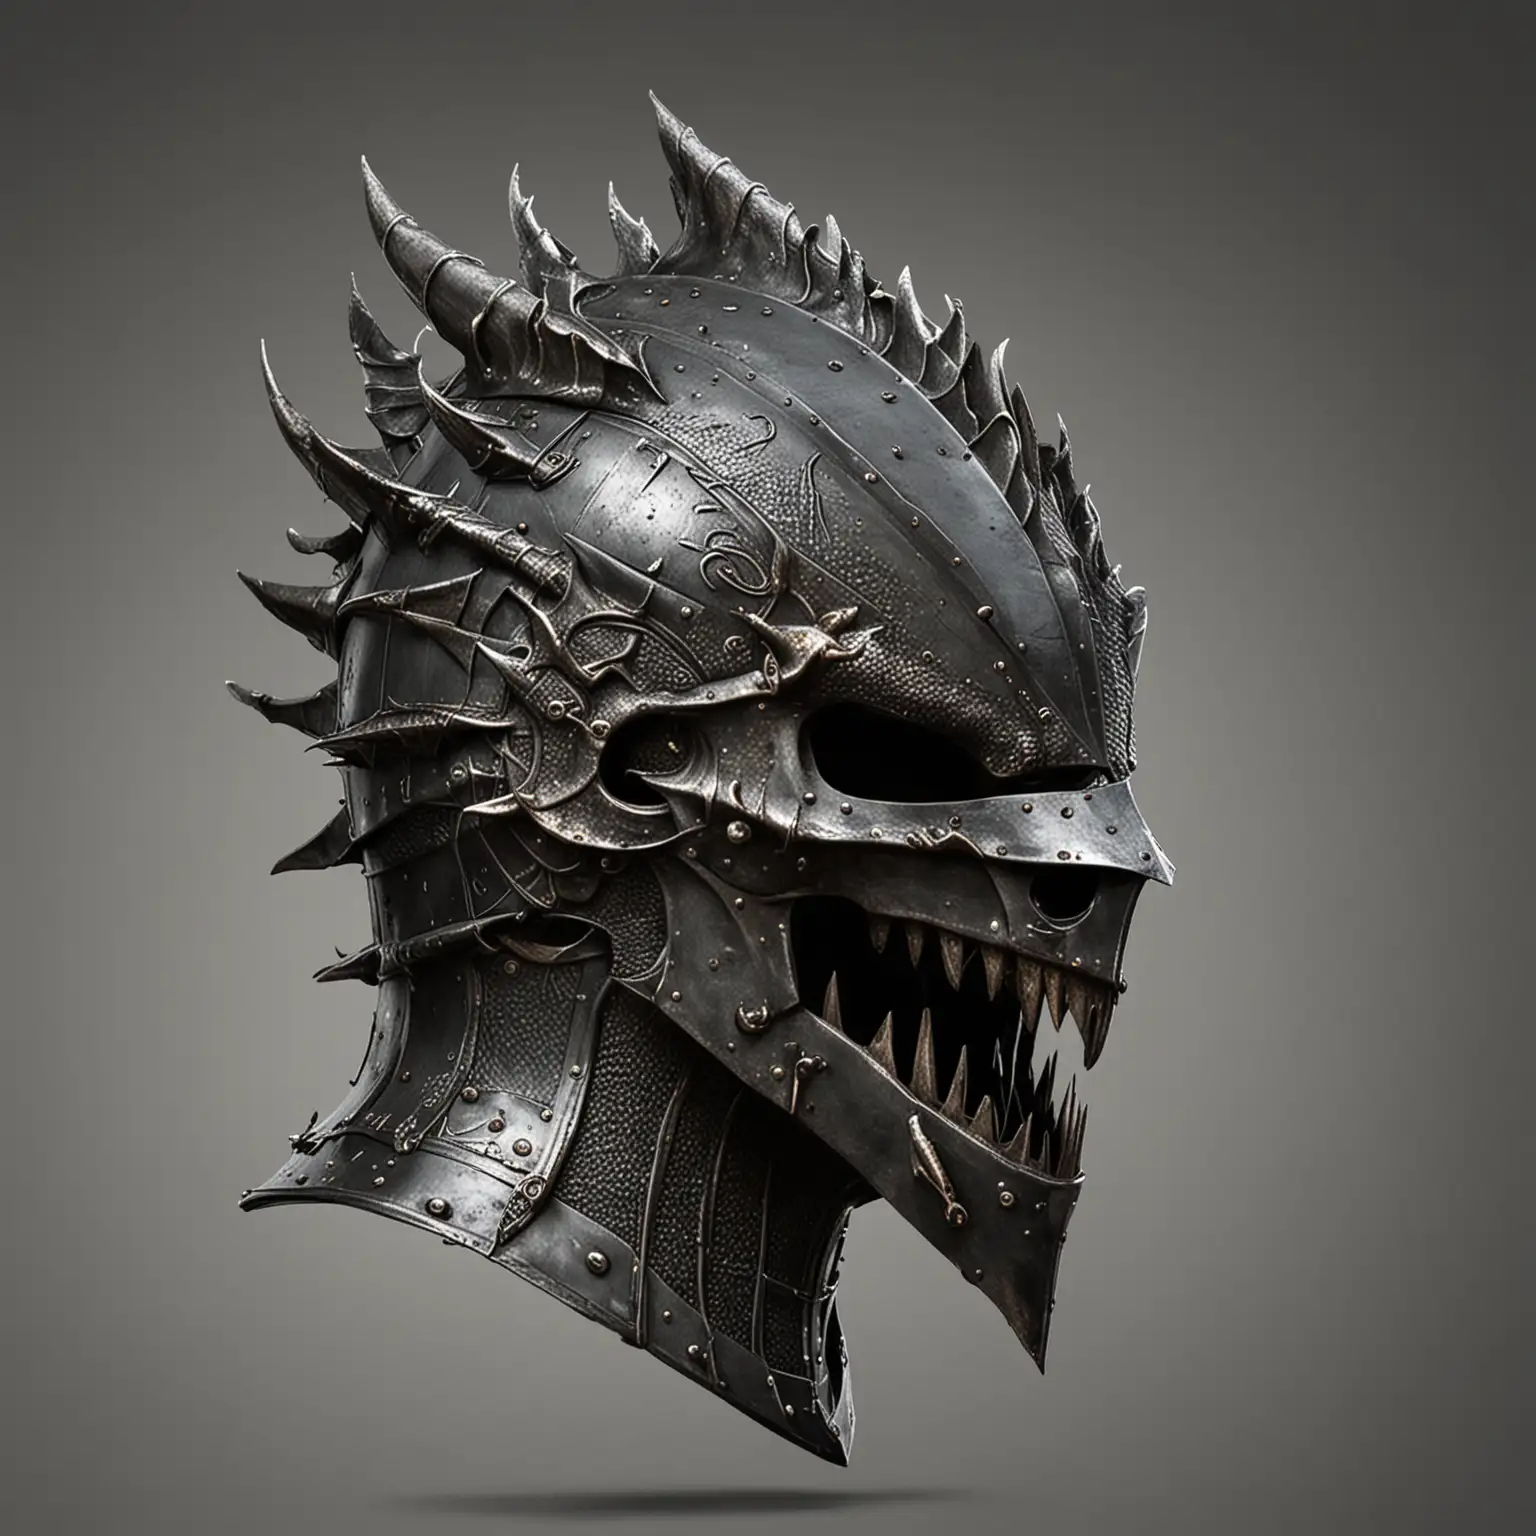 Realistic Medieval Knights Helm Shaped as Dragons Head